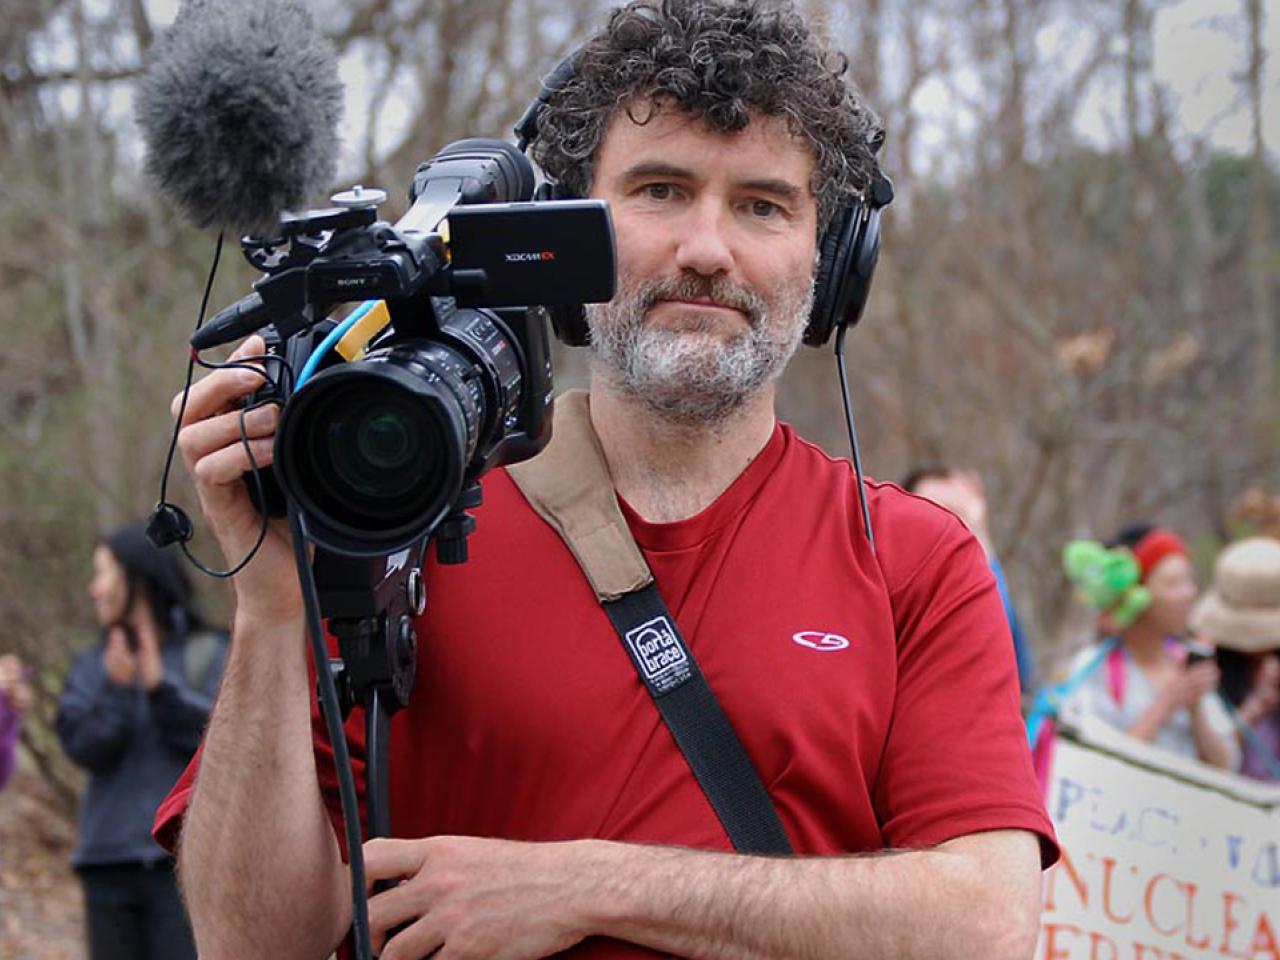 Robbie Leppzer on location filming at a protest holds his video camera and wear headphones.